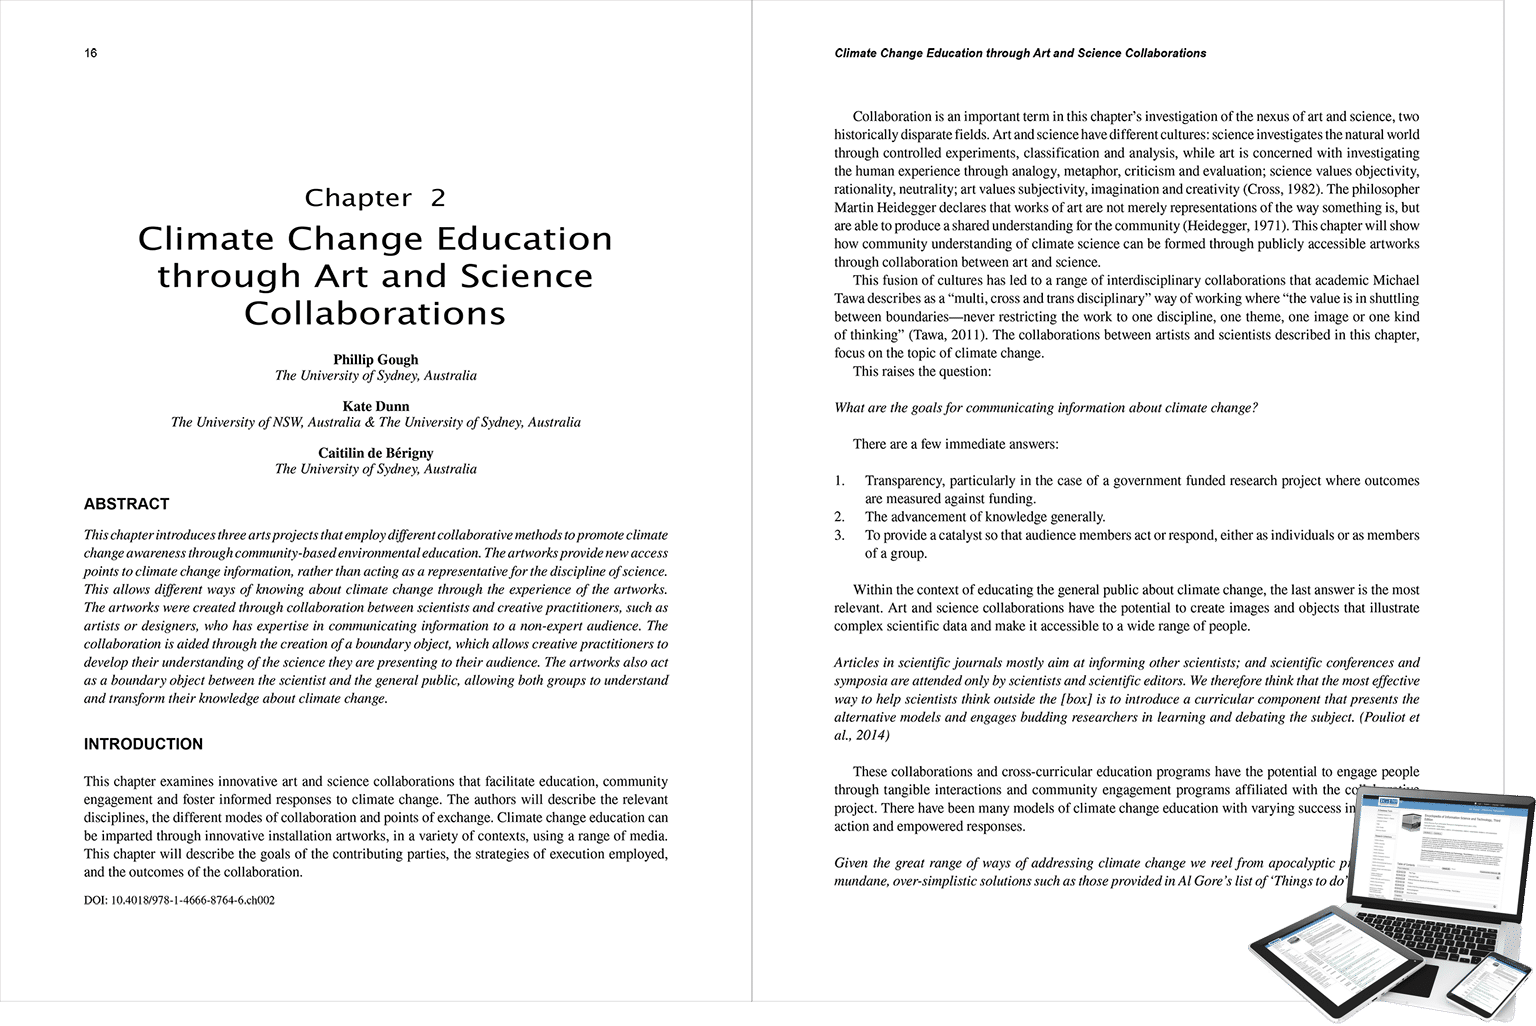 A two-page spread from an IGI Global textbook on climate change education, and a small overlaid graphic of content appearing on a laptop, a tablet, and a mobile phone.